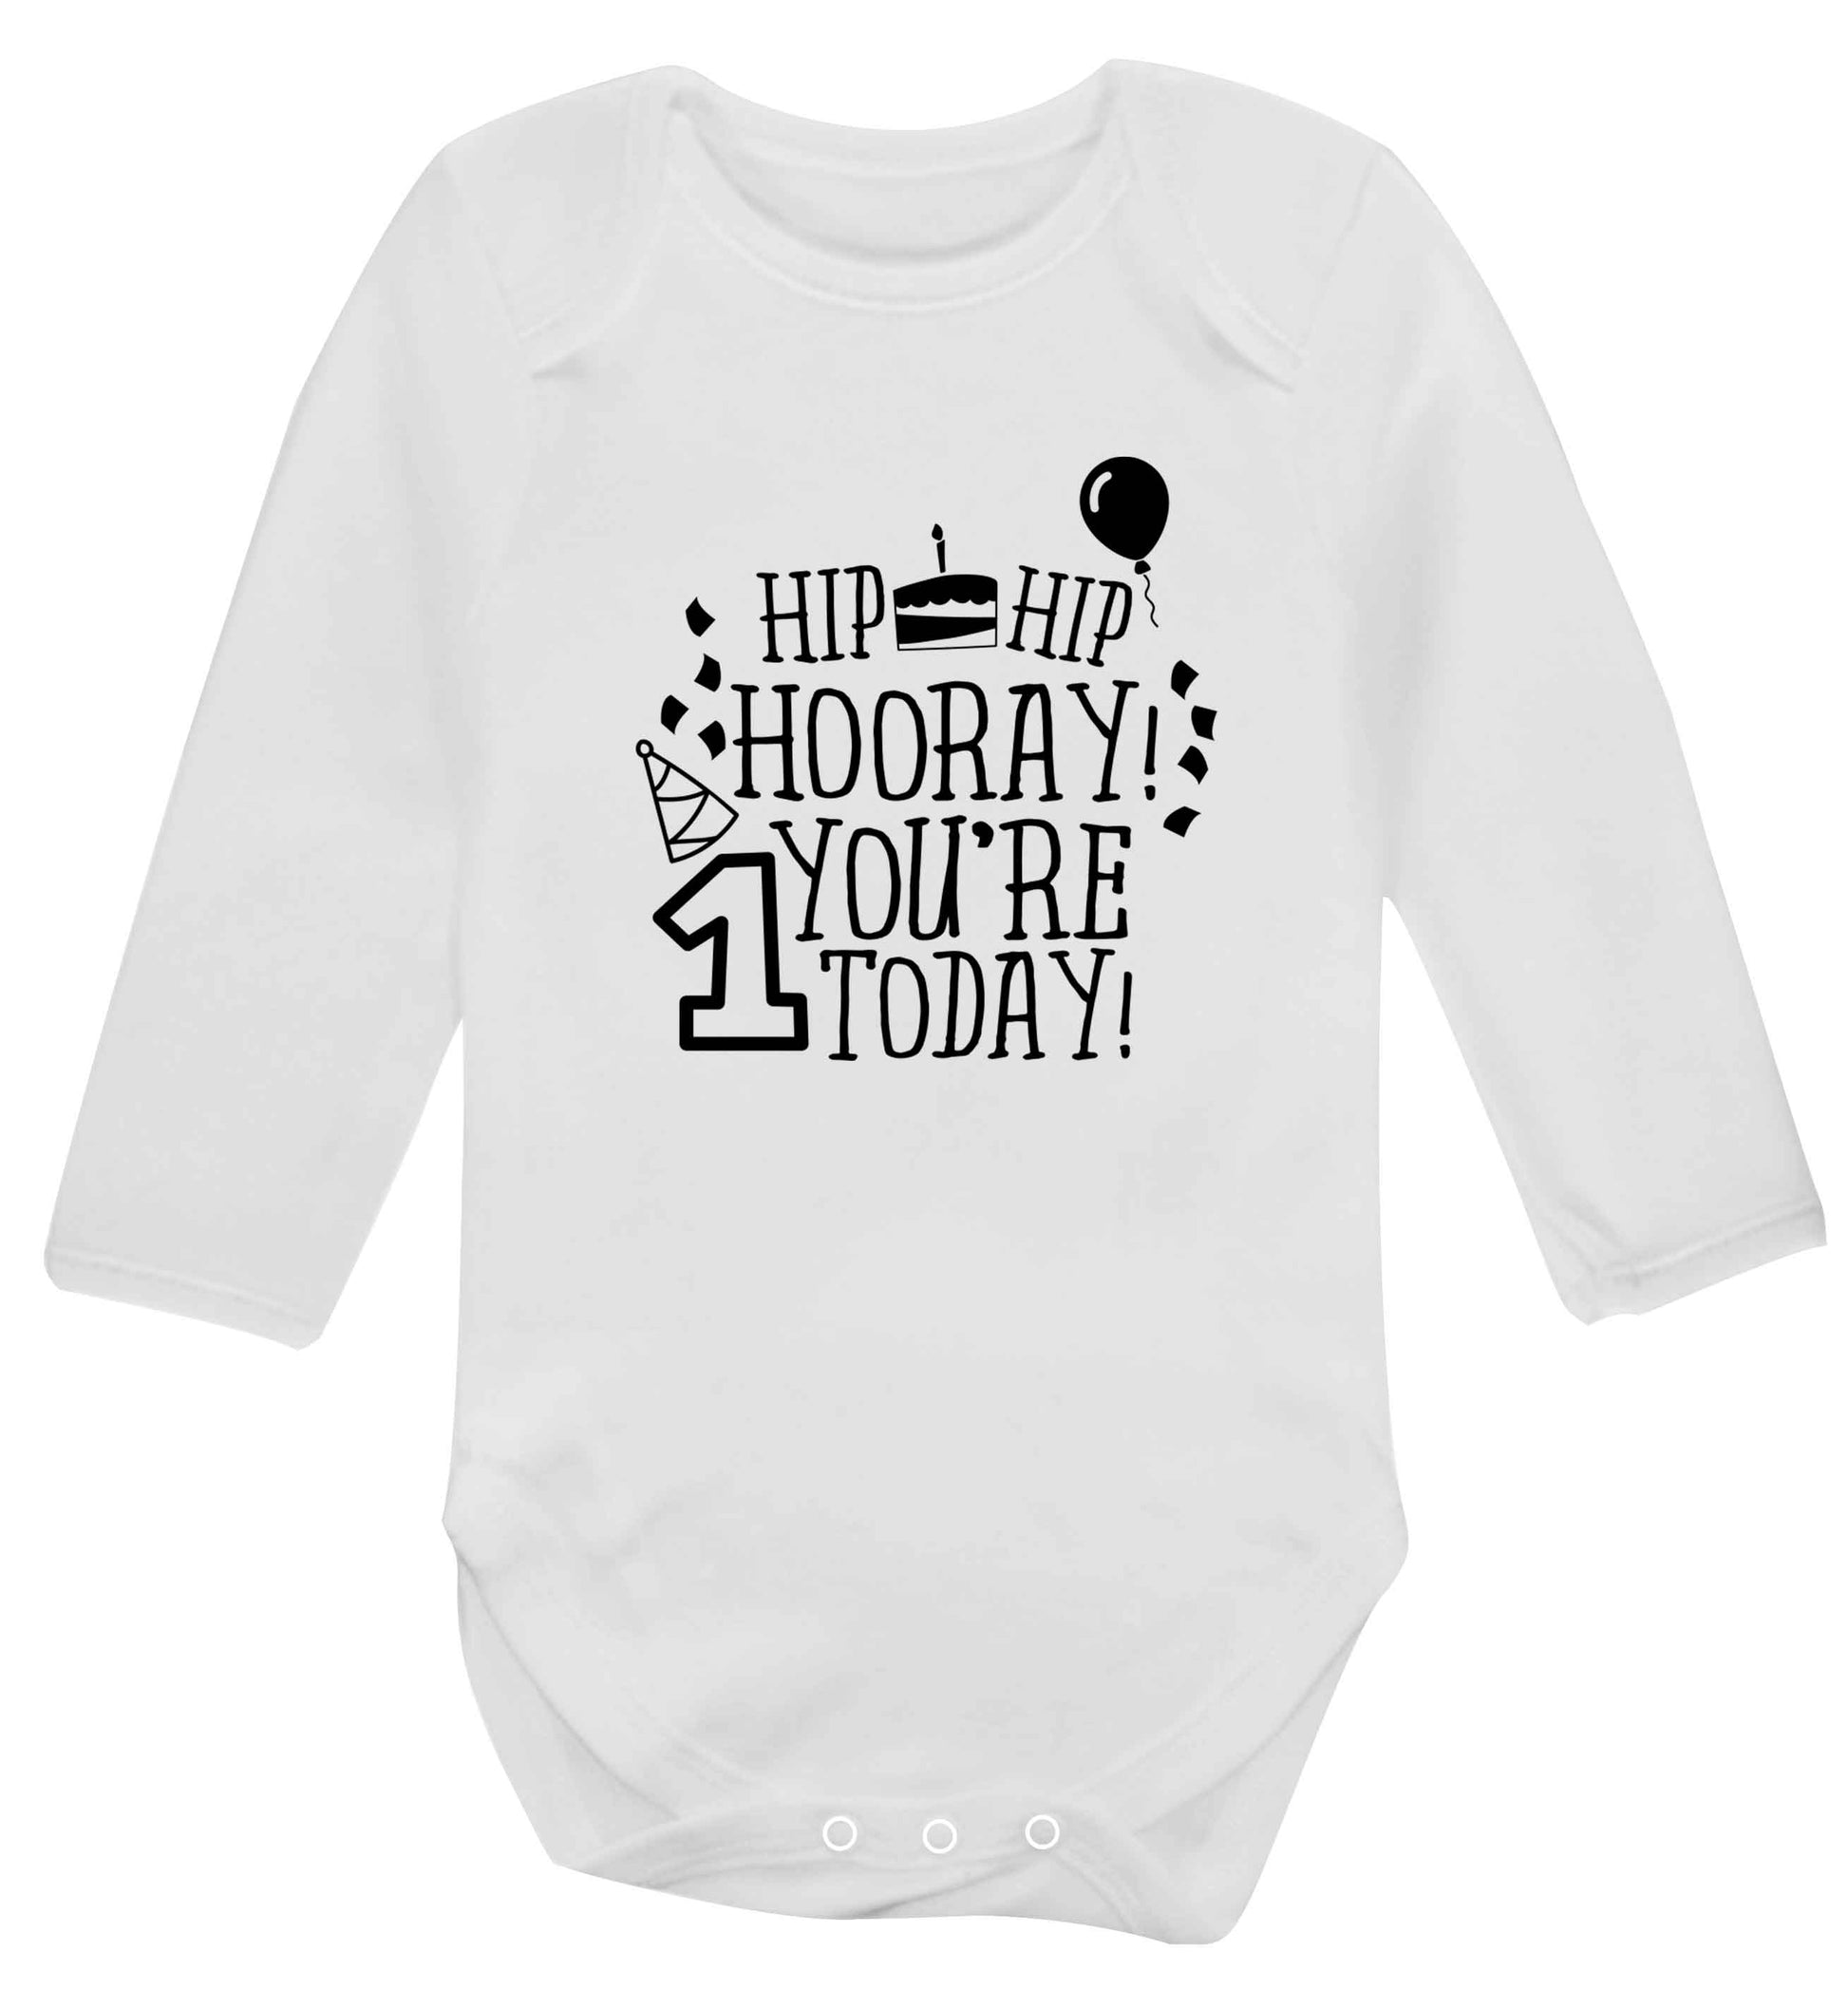 You're one today baby vest long sleeved white 6-12 months